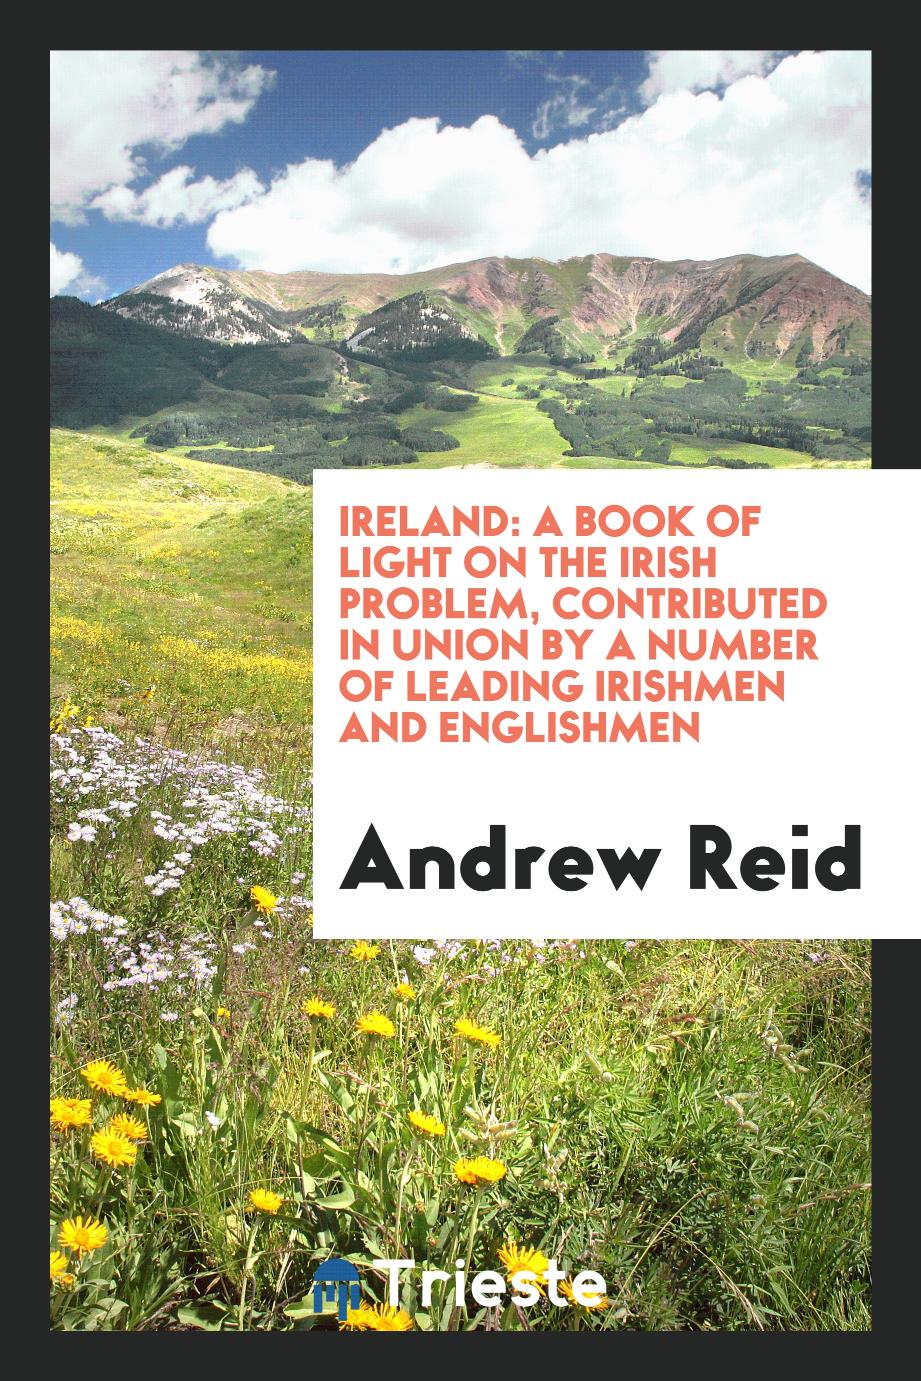 Ireland: A Book of Light on the Irish Problem, Contributed in Union by a Number of Leading Irishmen and Englishmen